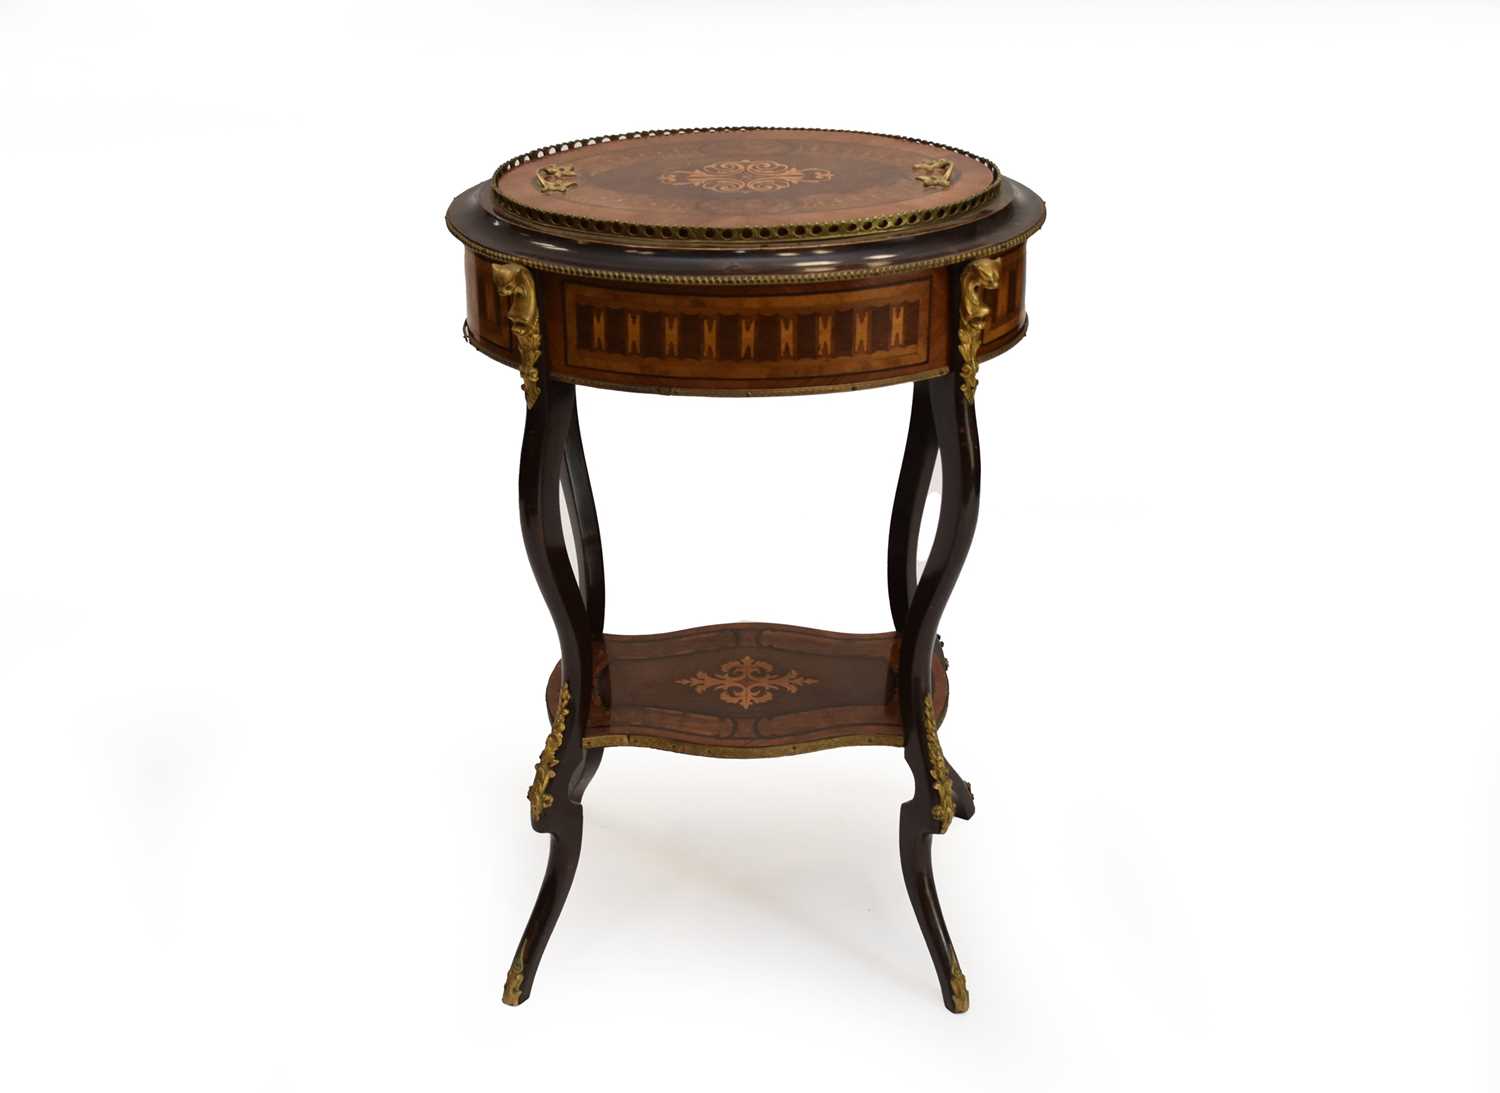 A 19th century French, brass mounted, boxwood and sycamore marquetry veneered, oval jardiniere